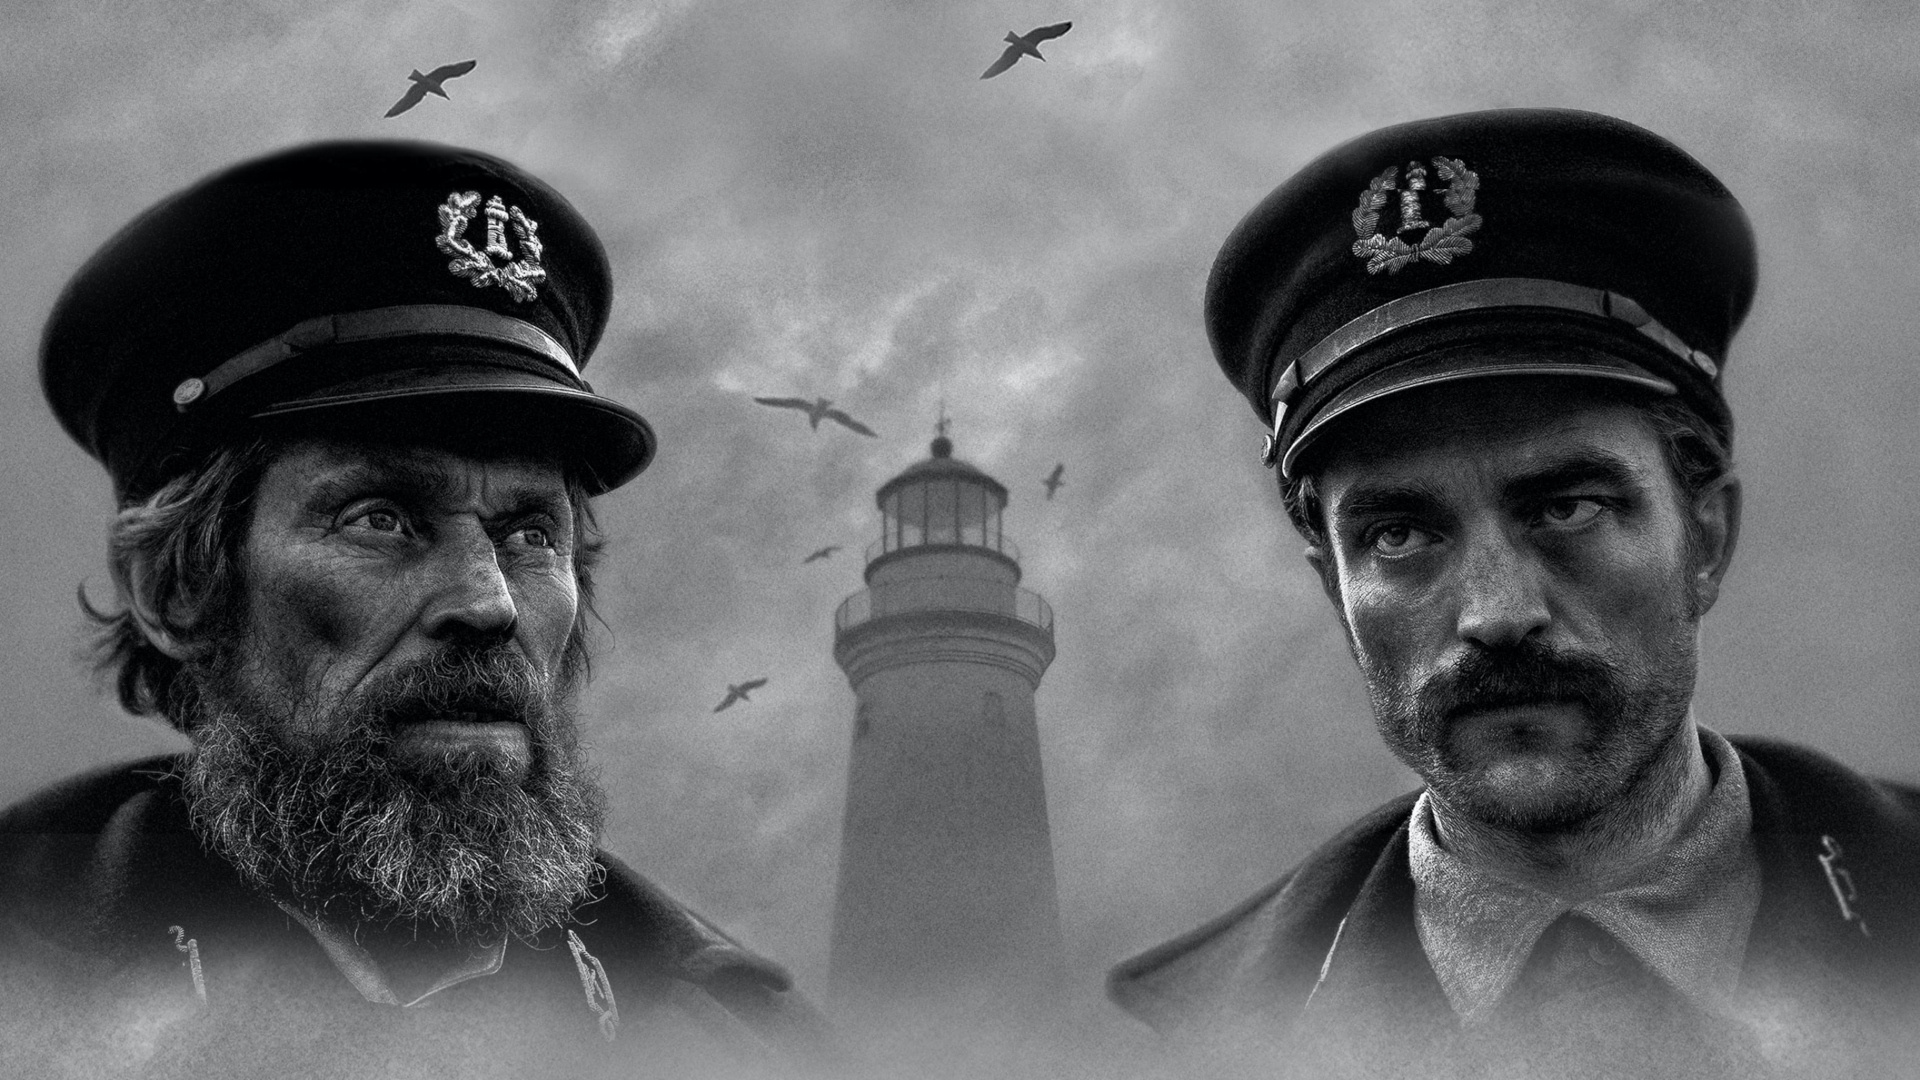 The Lighthouse, Movie fanart, Mysterious imagery, Captivating visuals, 1920x1080 Full HD Desktop